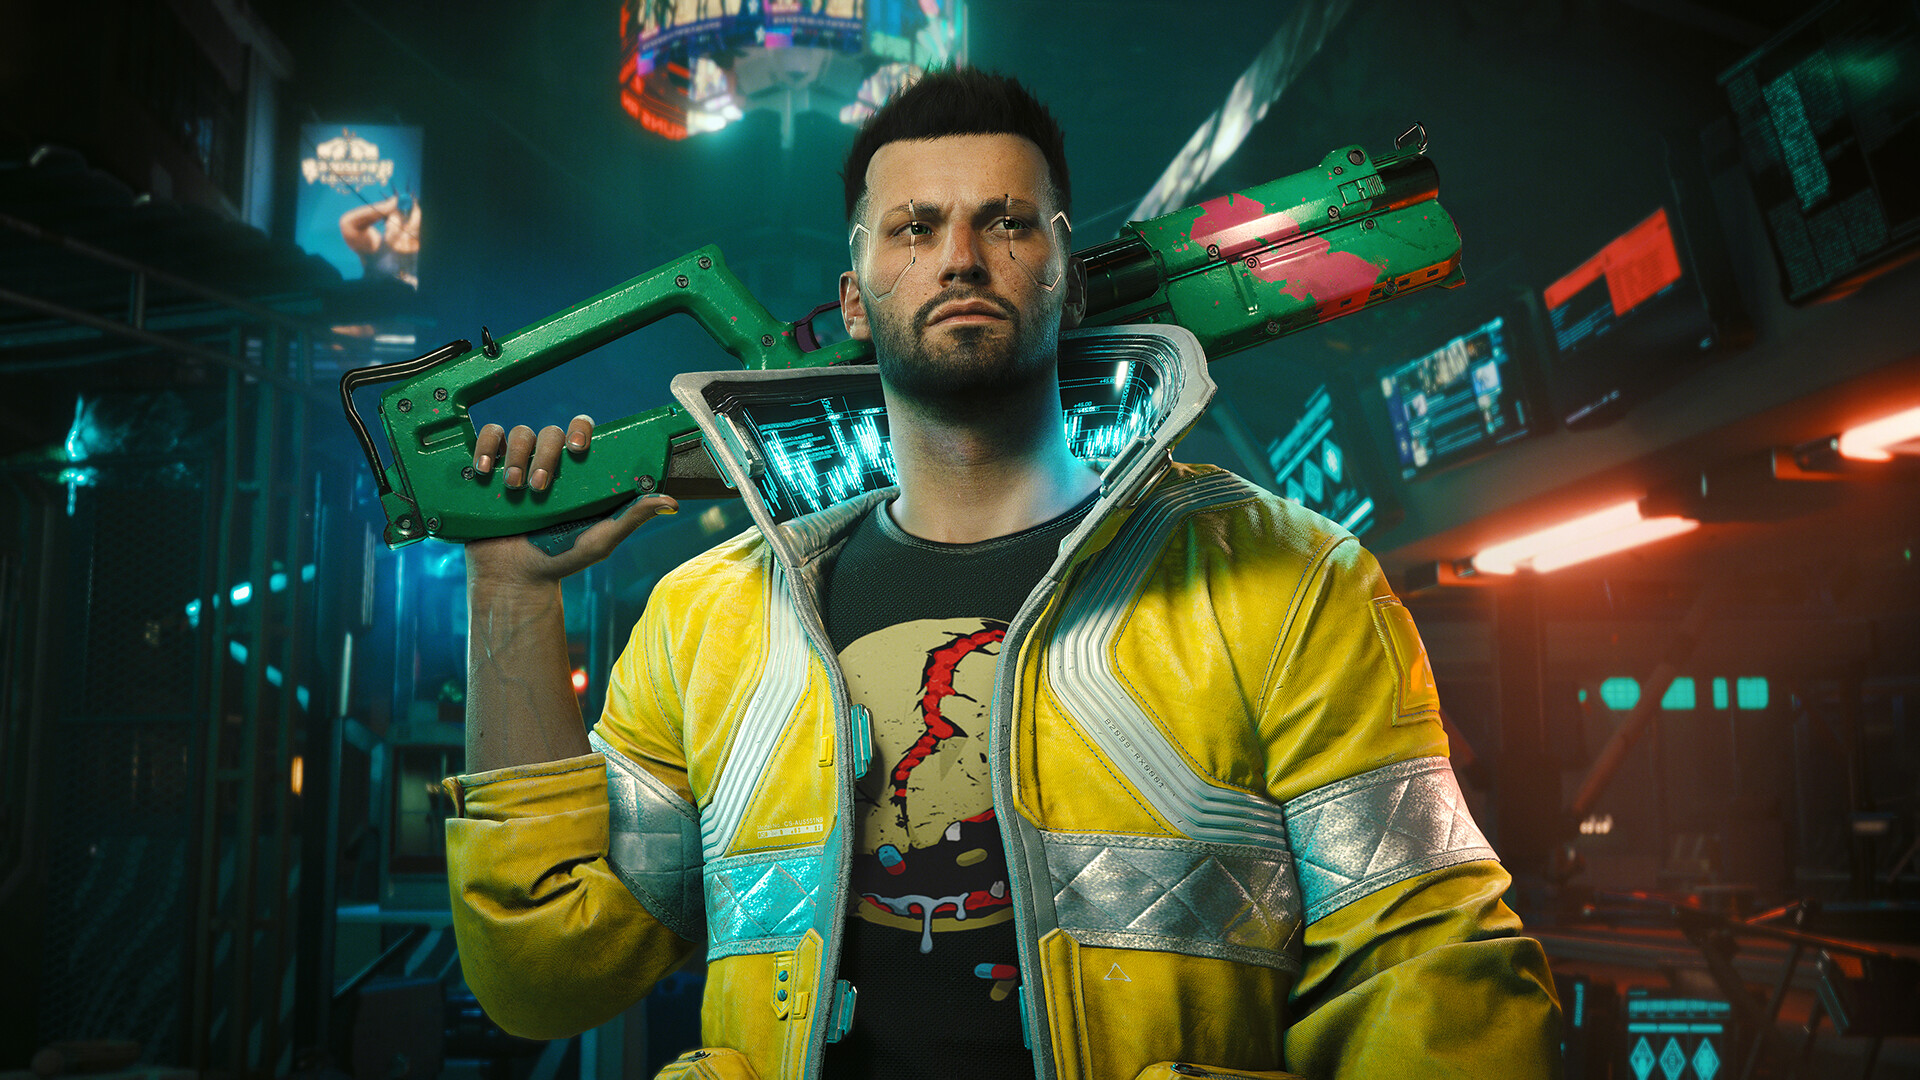 A cybernetically augmented man in a bright yellow jacket carries a green rifle across his shoulders against a cyberpunk city backdrop